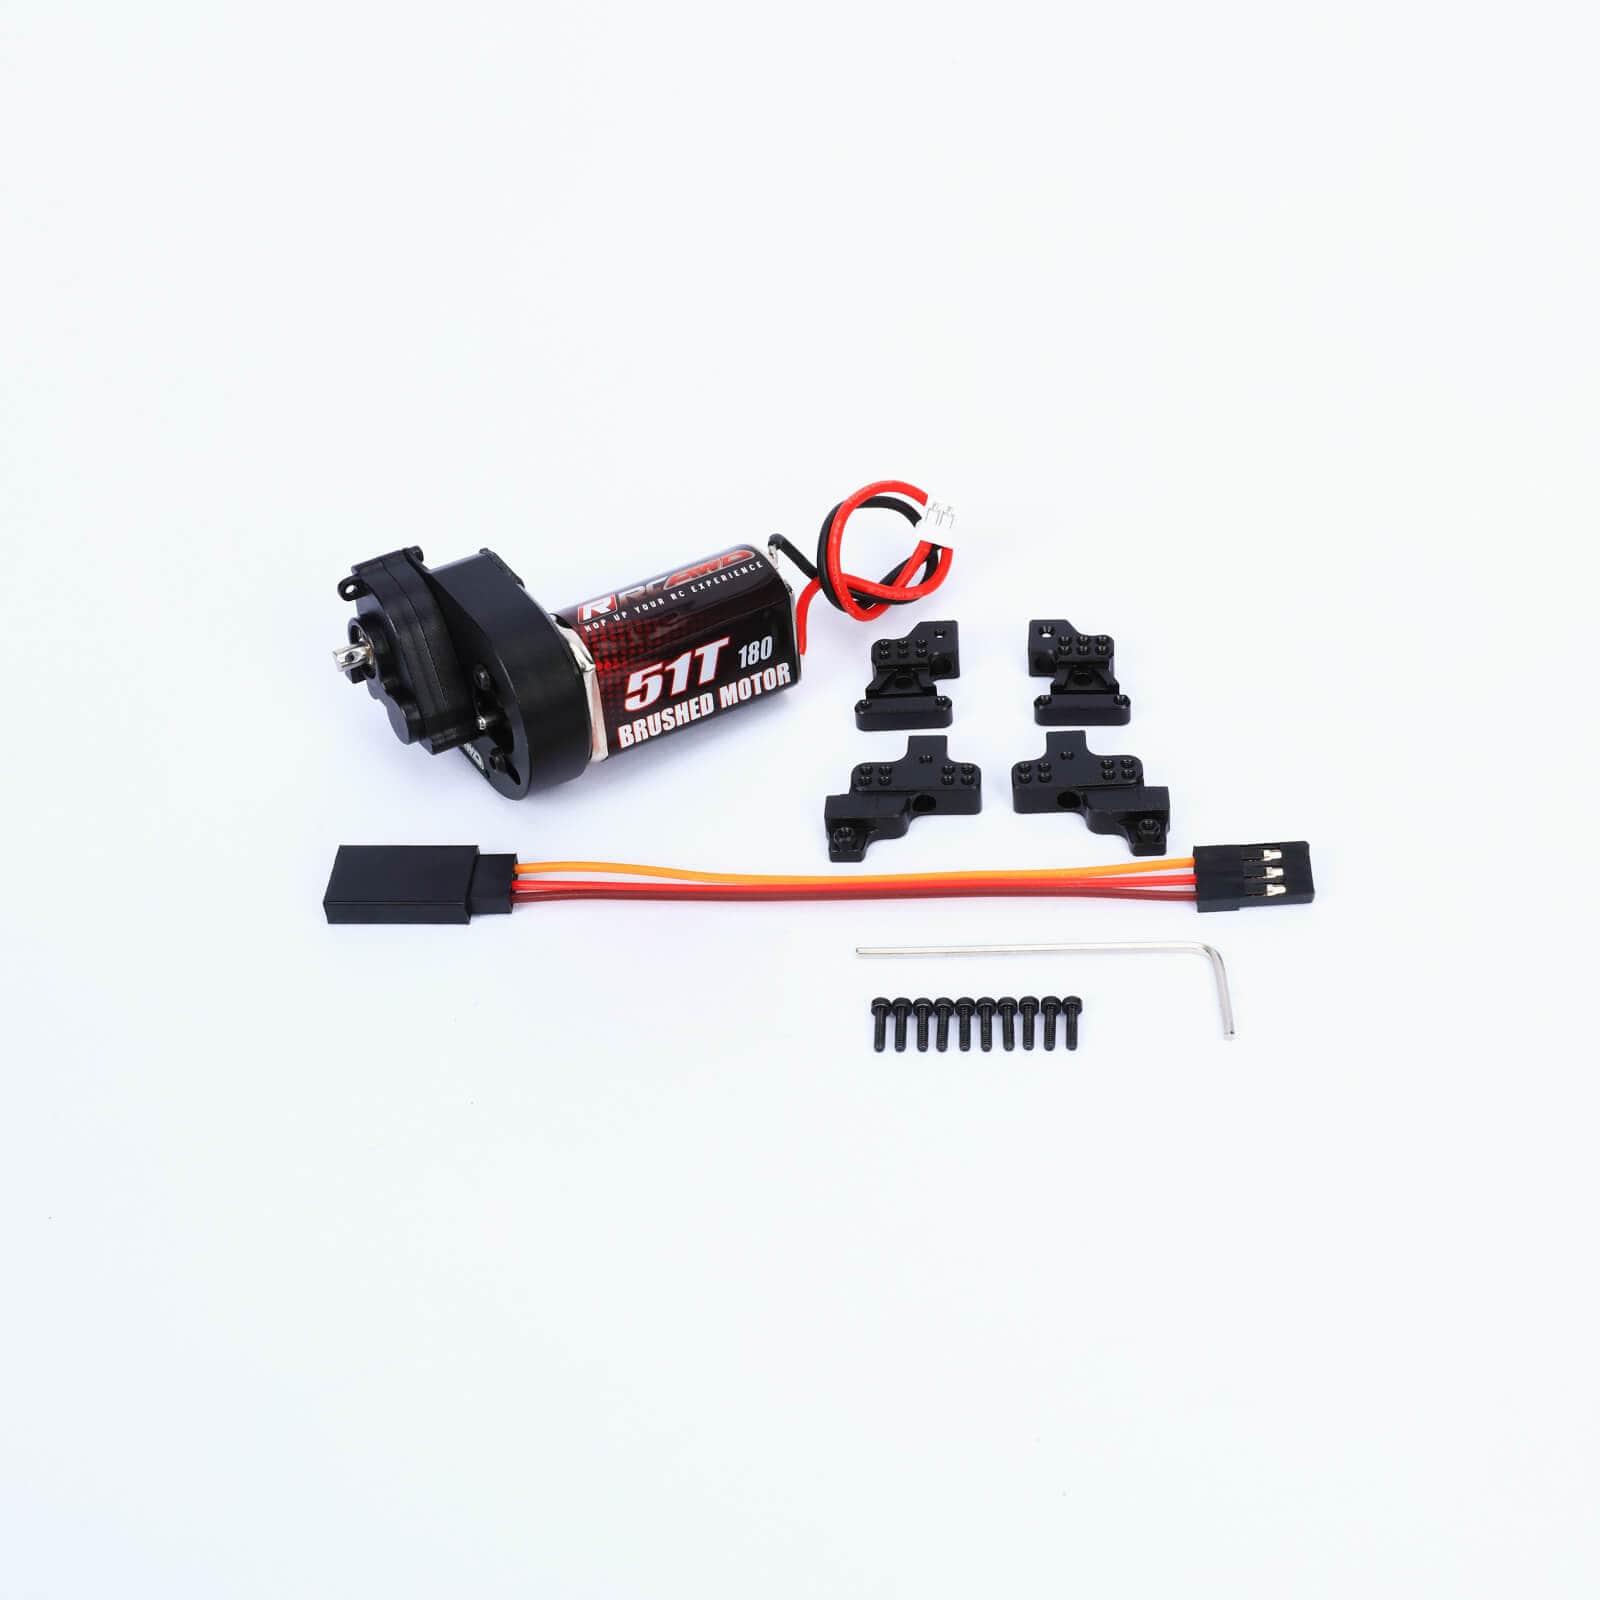 RCAWD Axial SCX24 RCAWD Axial SCX24 upgrades 180 Motor 51t Gear Housing Transmission & Extension